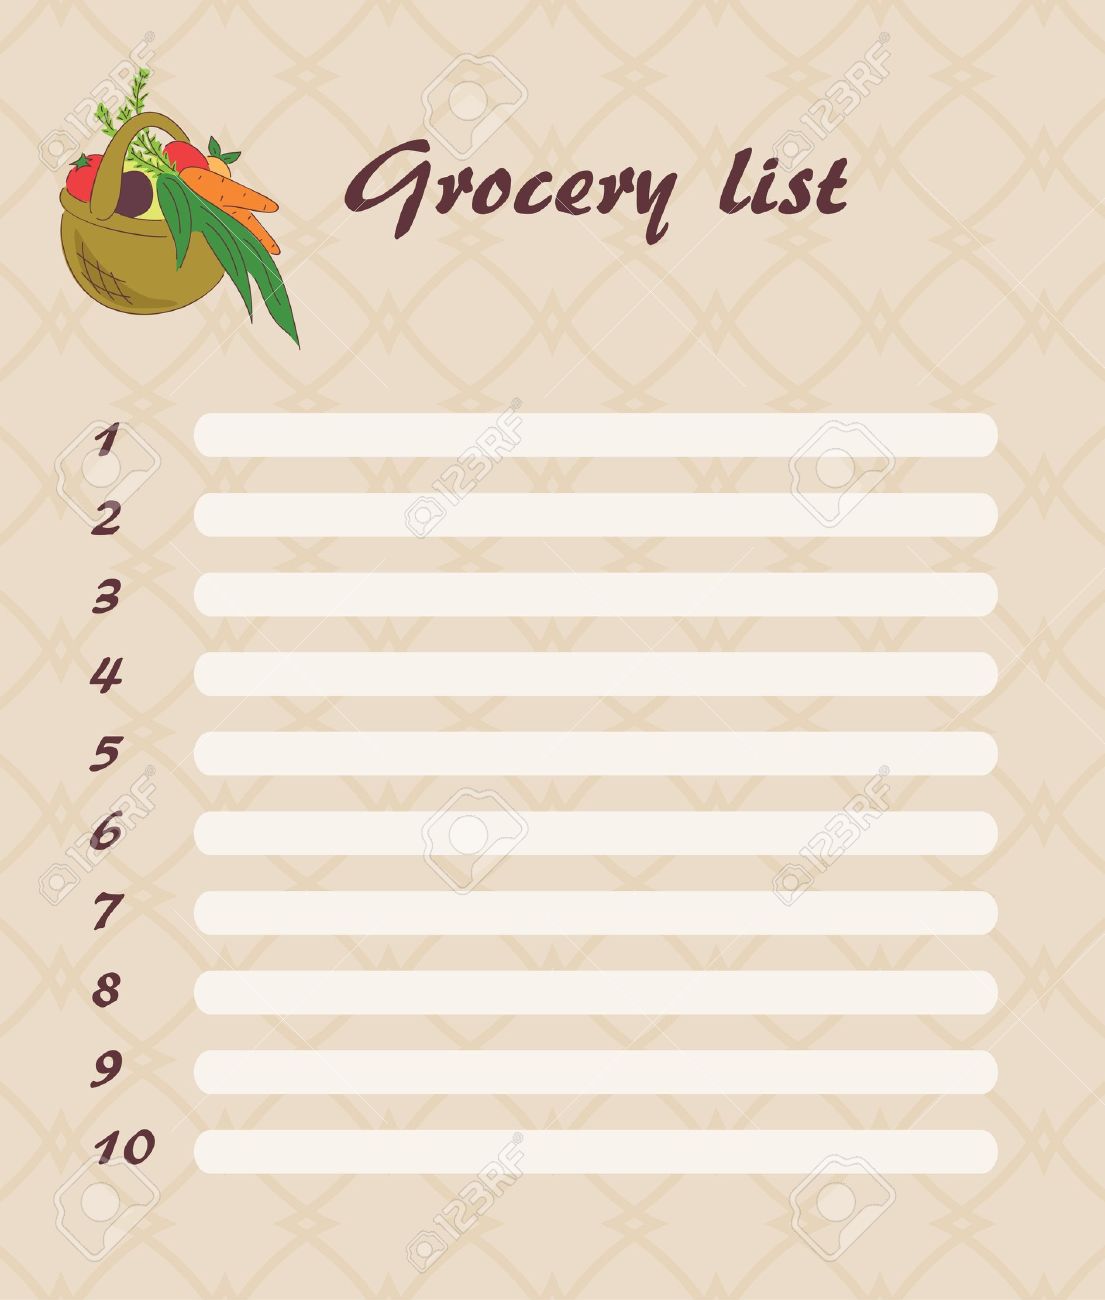 Grocery list clipart 